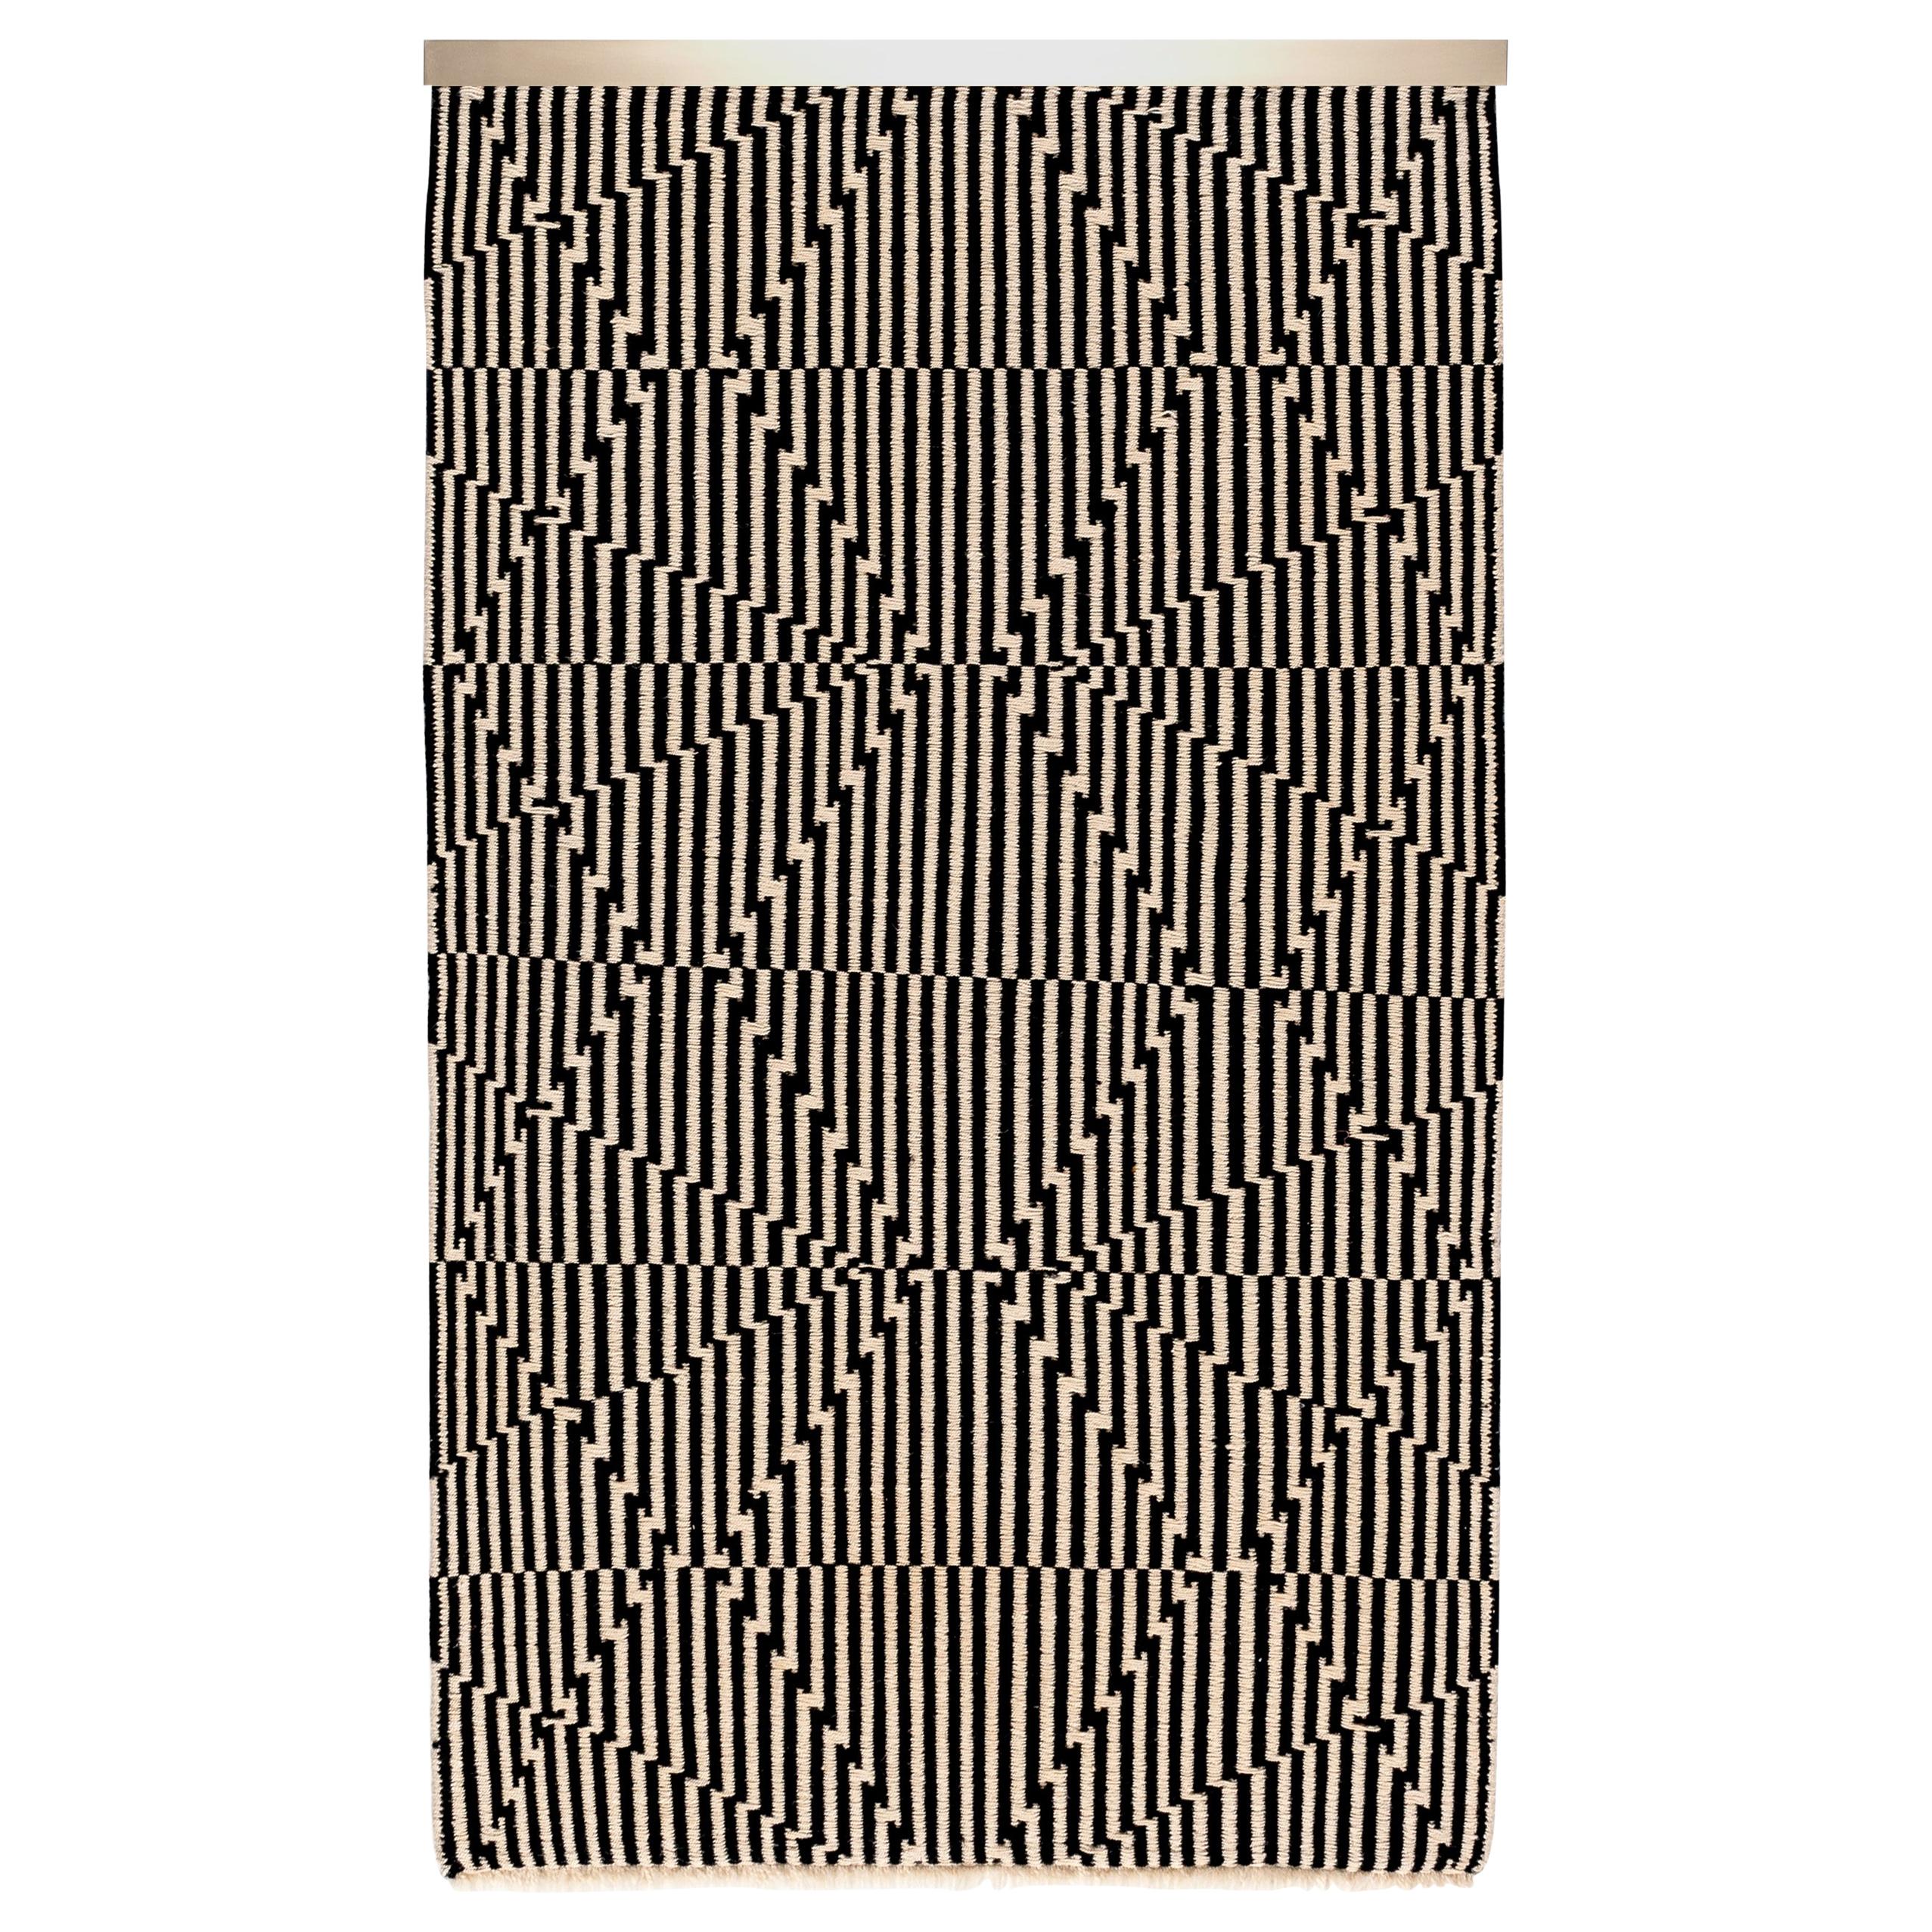 Opticals Wall Hanging Intersection Handwoven Wool in Black and White In Stock